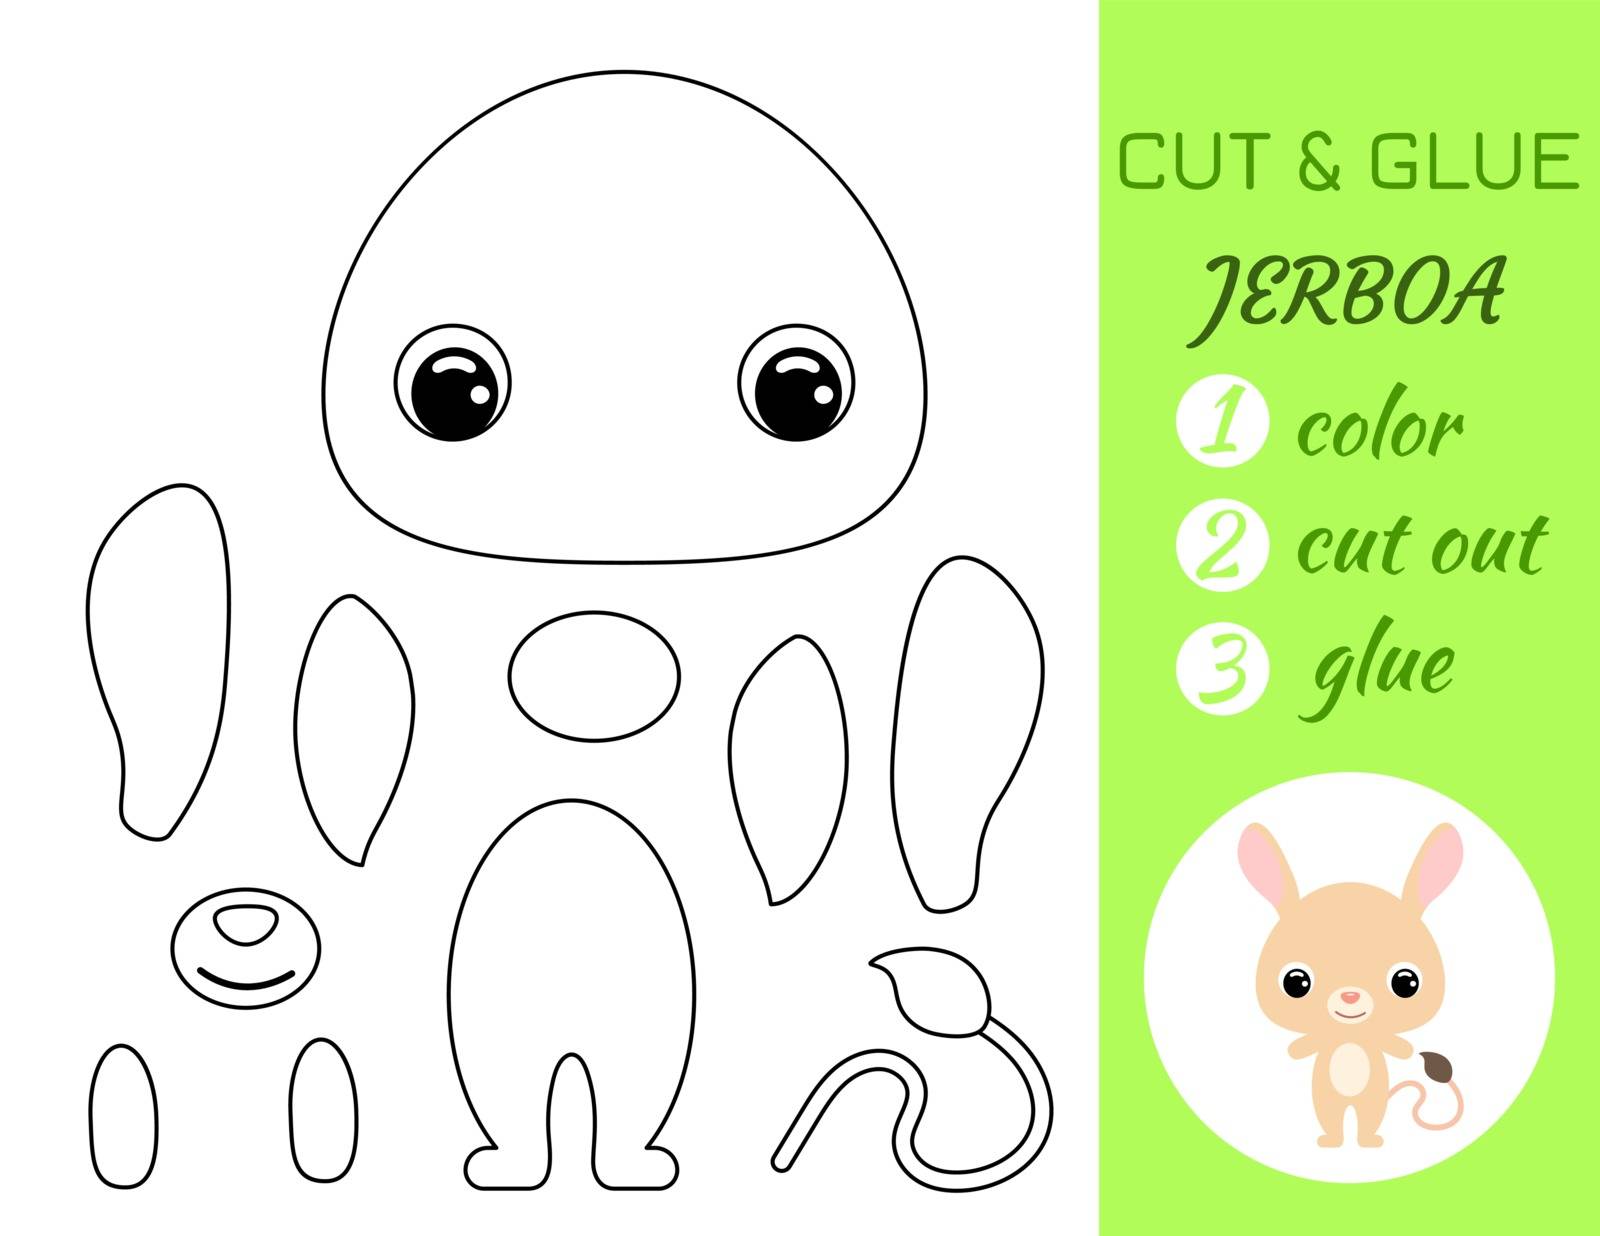 Coloring book cut and glue baby jerboa. Educational paper game for preschool children. Cut and Paste Worksheet. Color, cut parts and glue on paper.Cartoon character. Vector stock illustration.